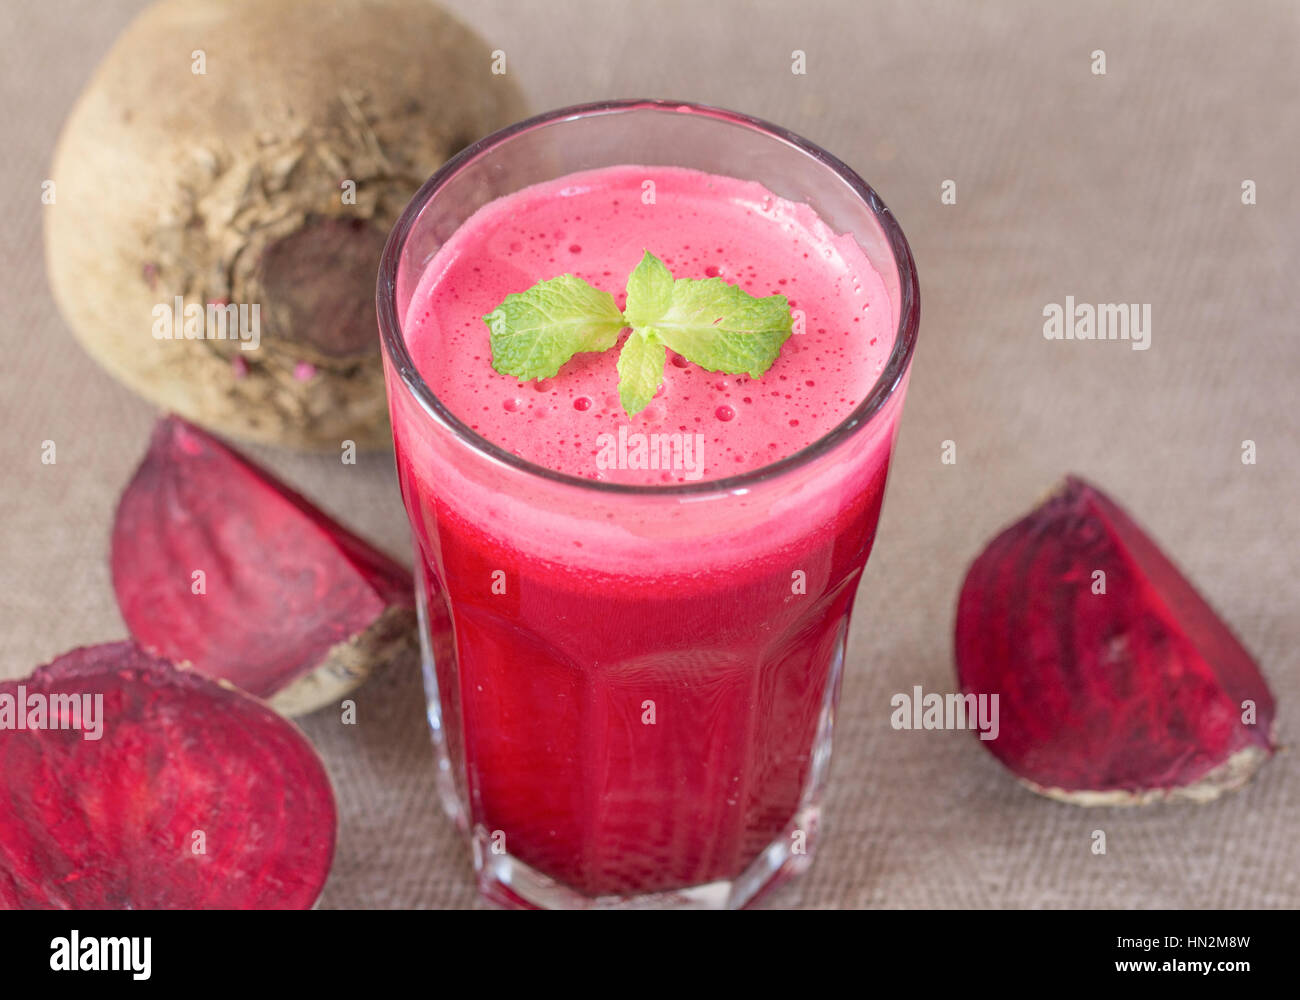 beetroot juice in glass with beetroot vegetables Stock Photo